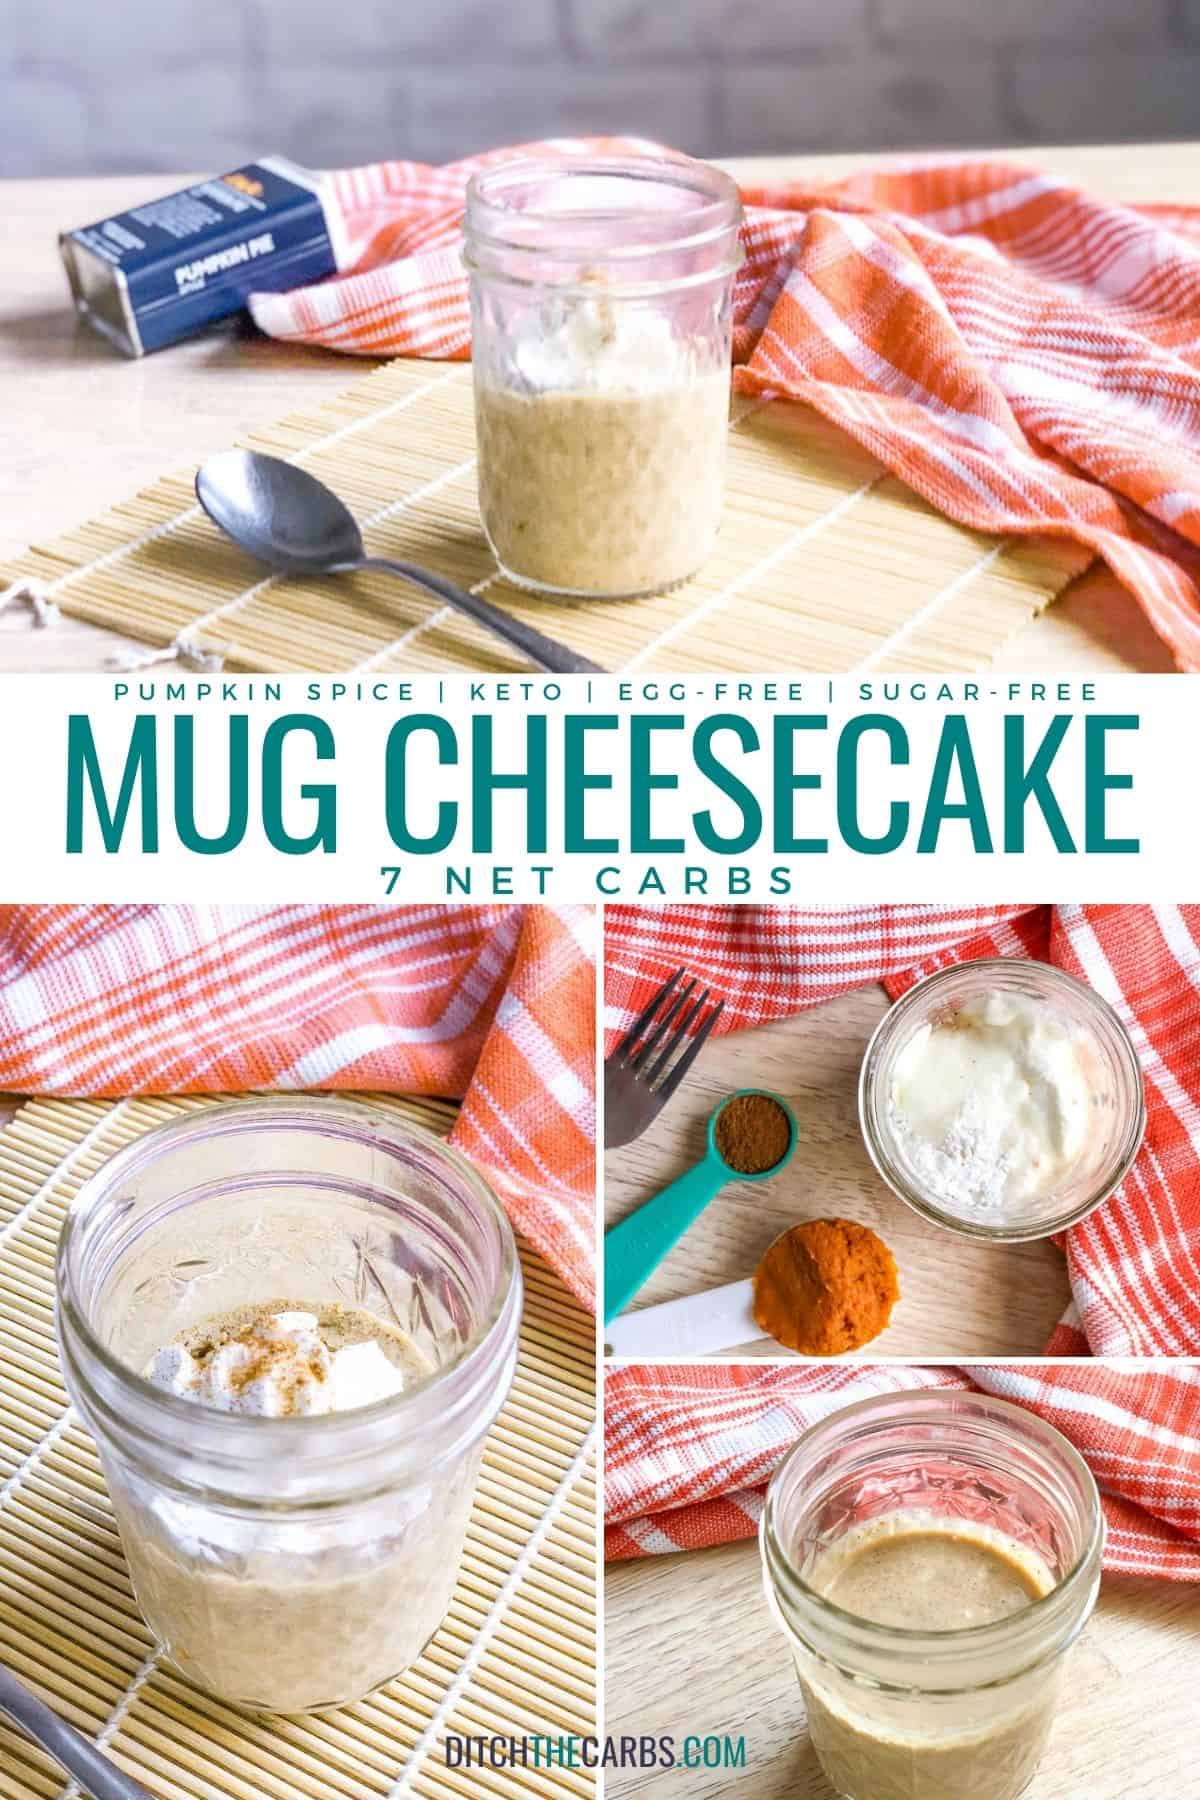 A variety of pictures in a collage showing how to make pumpkin spice keto mug cheesecake.